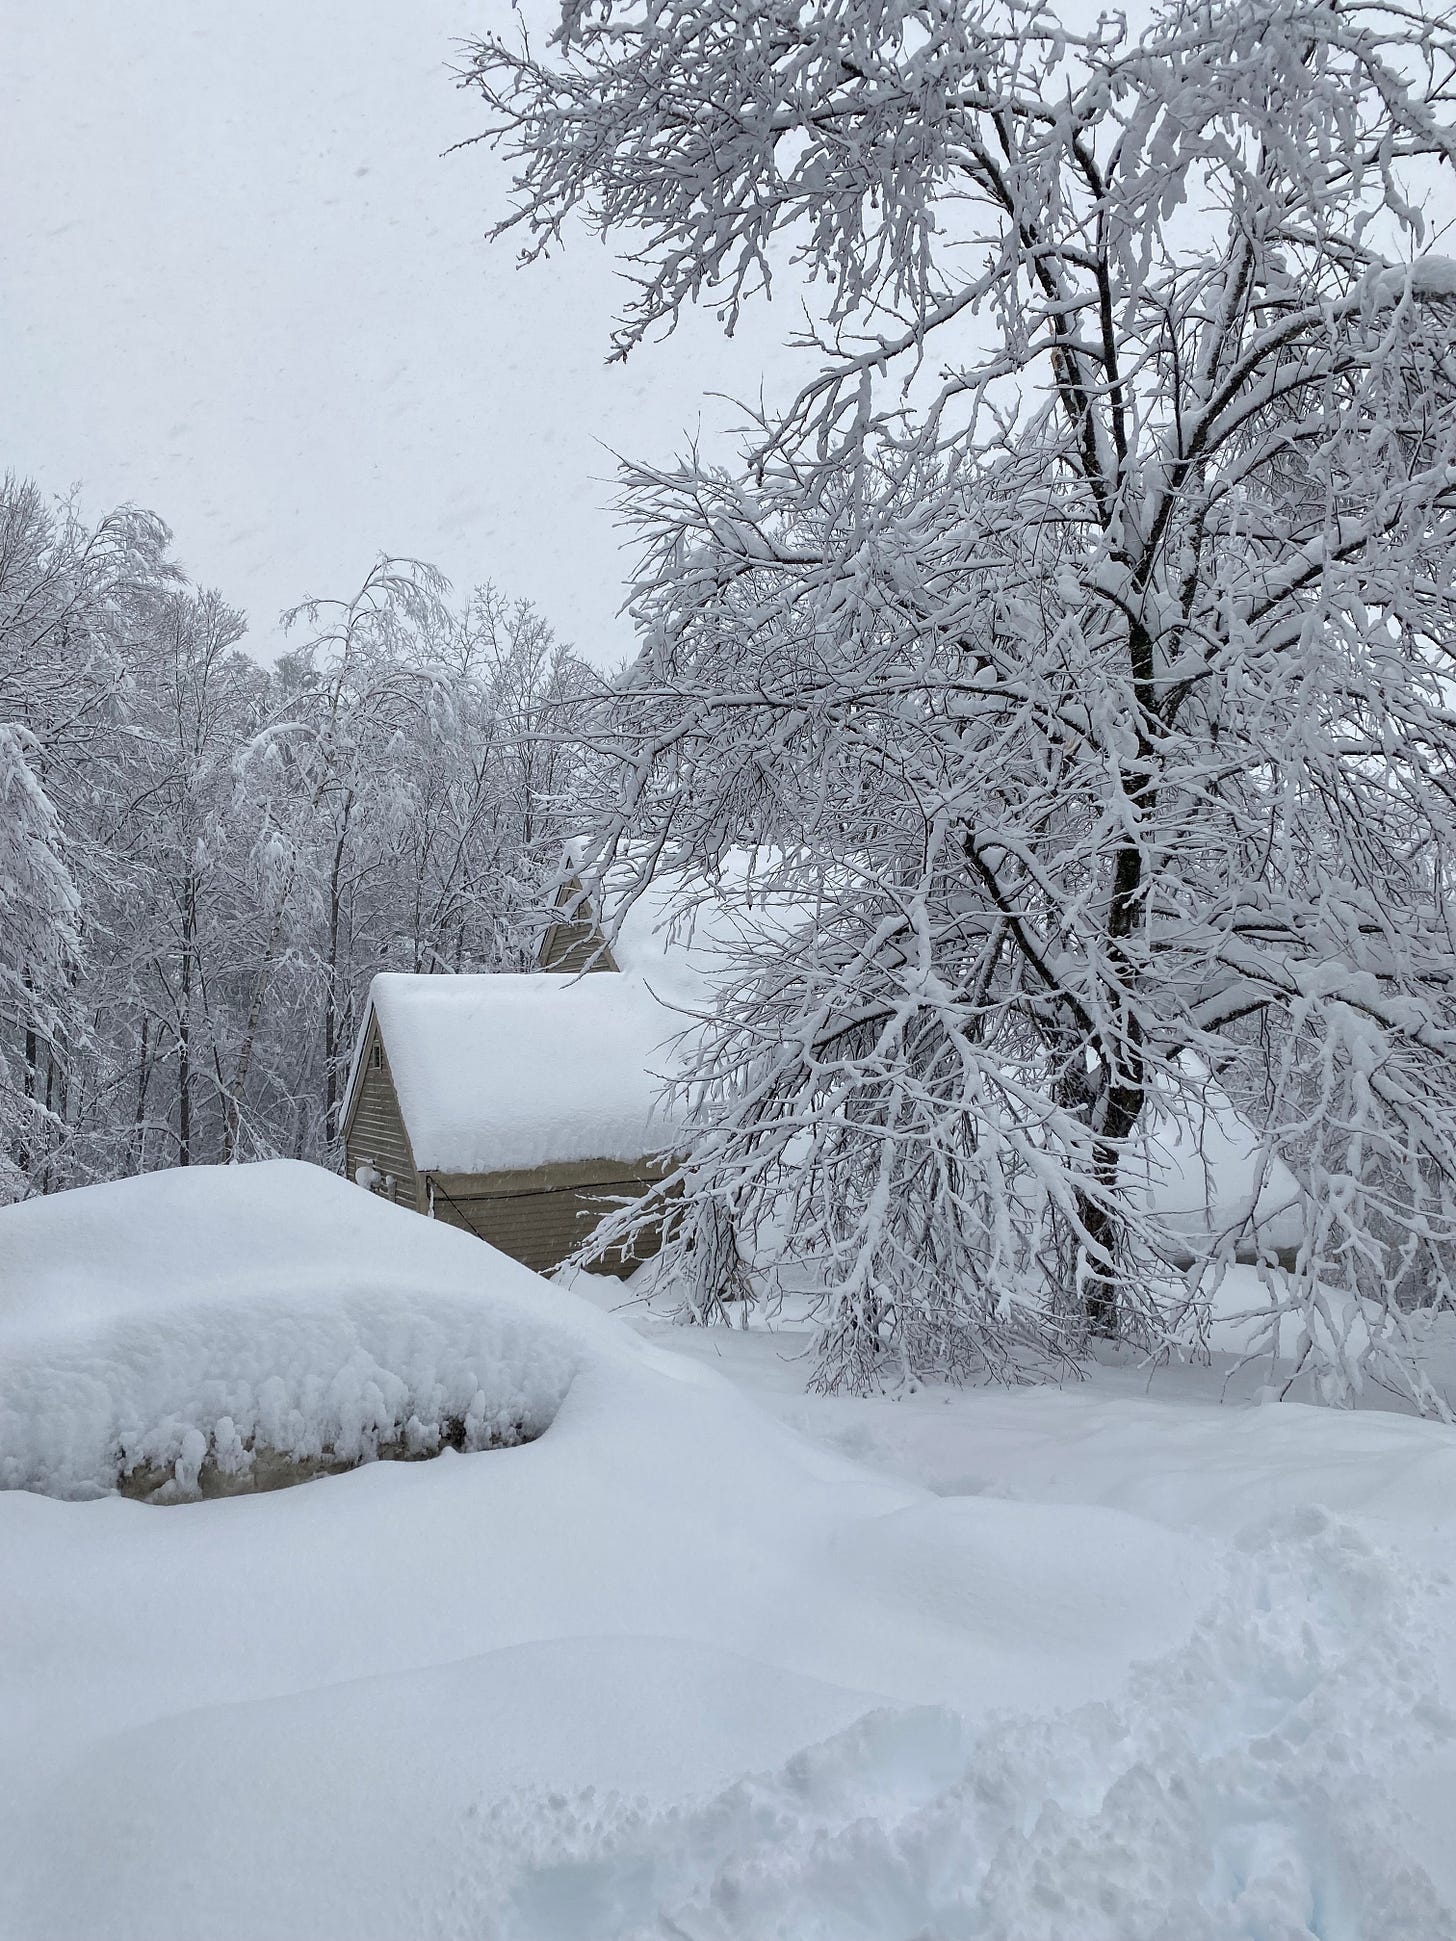 View of my house, car and driveway covered in several feet of snow, and surrounded by snow-covered trees.